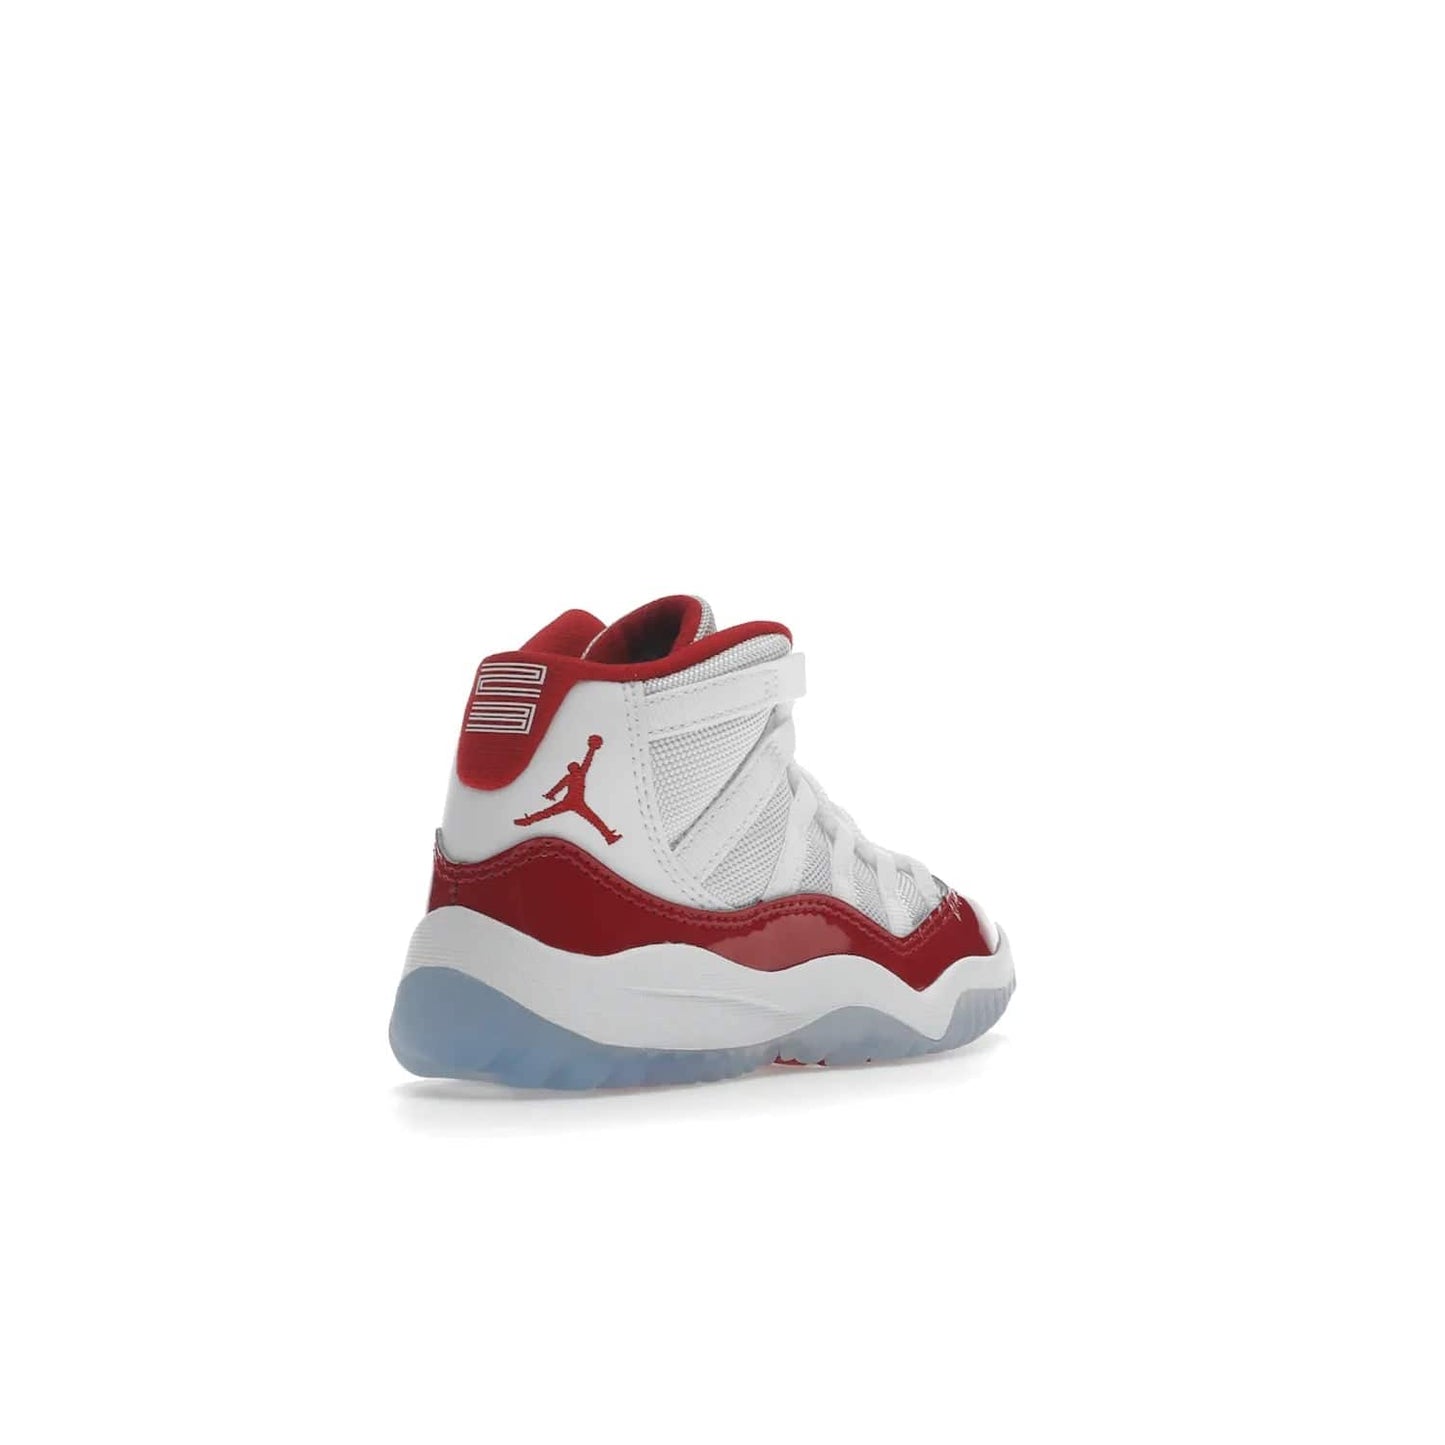 Jordan 11 Retro Cherry (2022) (PS) - Image 32 - Only at www.BallersClubKickz.com - An iconic silhouette with a timeless look, the Air Jordan 11 Retro Cherry 2022 PS features a crisp White, Varsity Red and Black colorway. The upper is made of ballistic mesh, a red patent leather mudguard, '23' branding and white Phylon midsole. Get optimal cushioning and comfort on December 10th, 2022. Don't miss out.